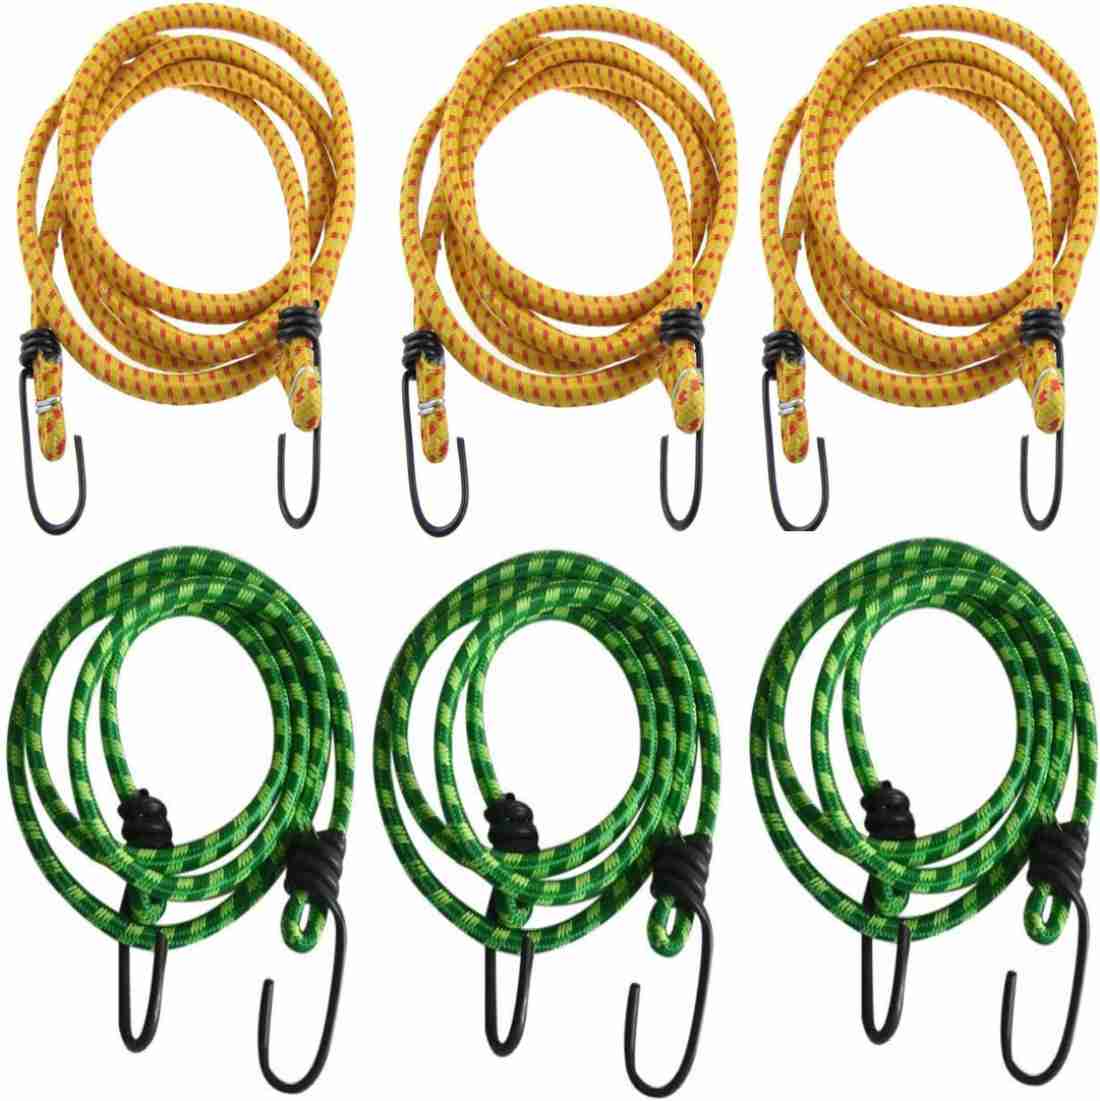 MGP FASHION High Strength Elastic Rope Bungee Shock Cord Cable Luggage with  Hook Green,Yellow - Buy MGP FASHION High Strength Elastic Rope Bungee Shock  Cord Cable Luggage with Hook Green,Yellow Online at